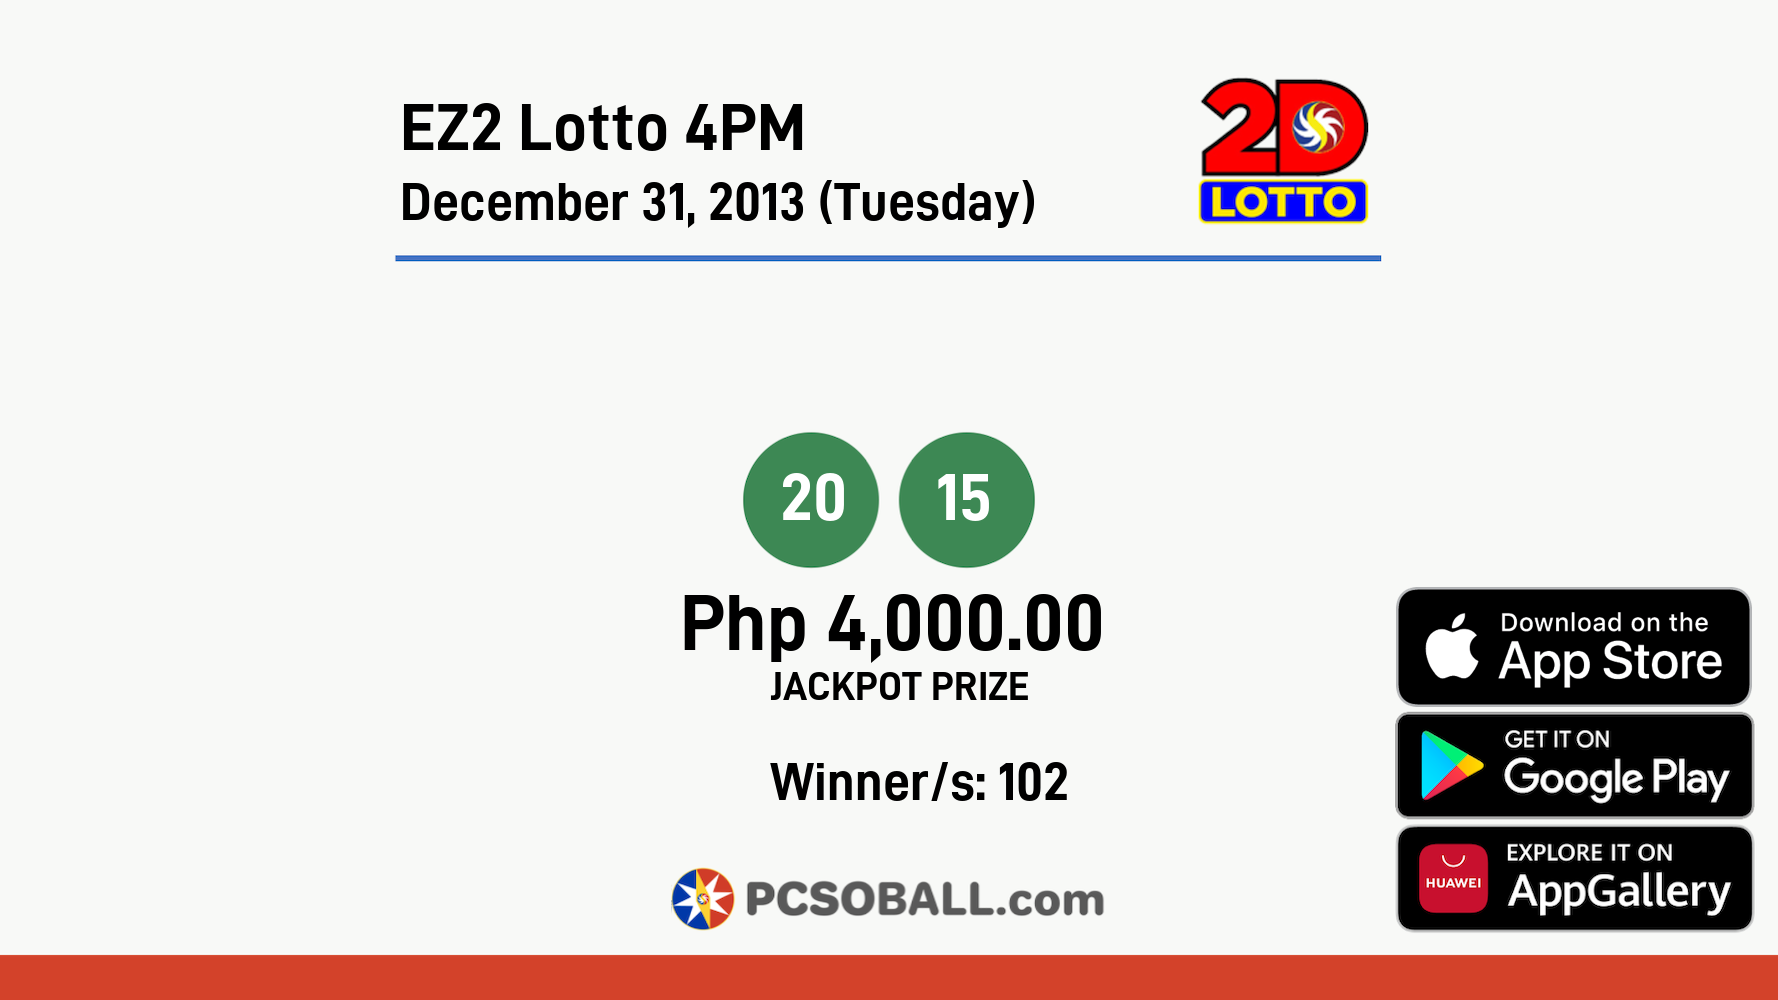 EZ2 Lotto 4PM December 31, 2013 (Tuesday) Result